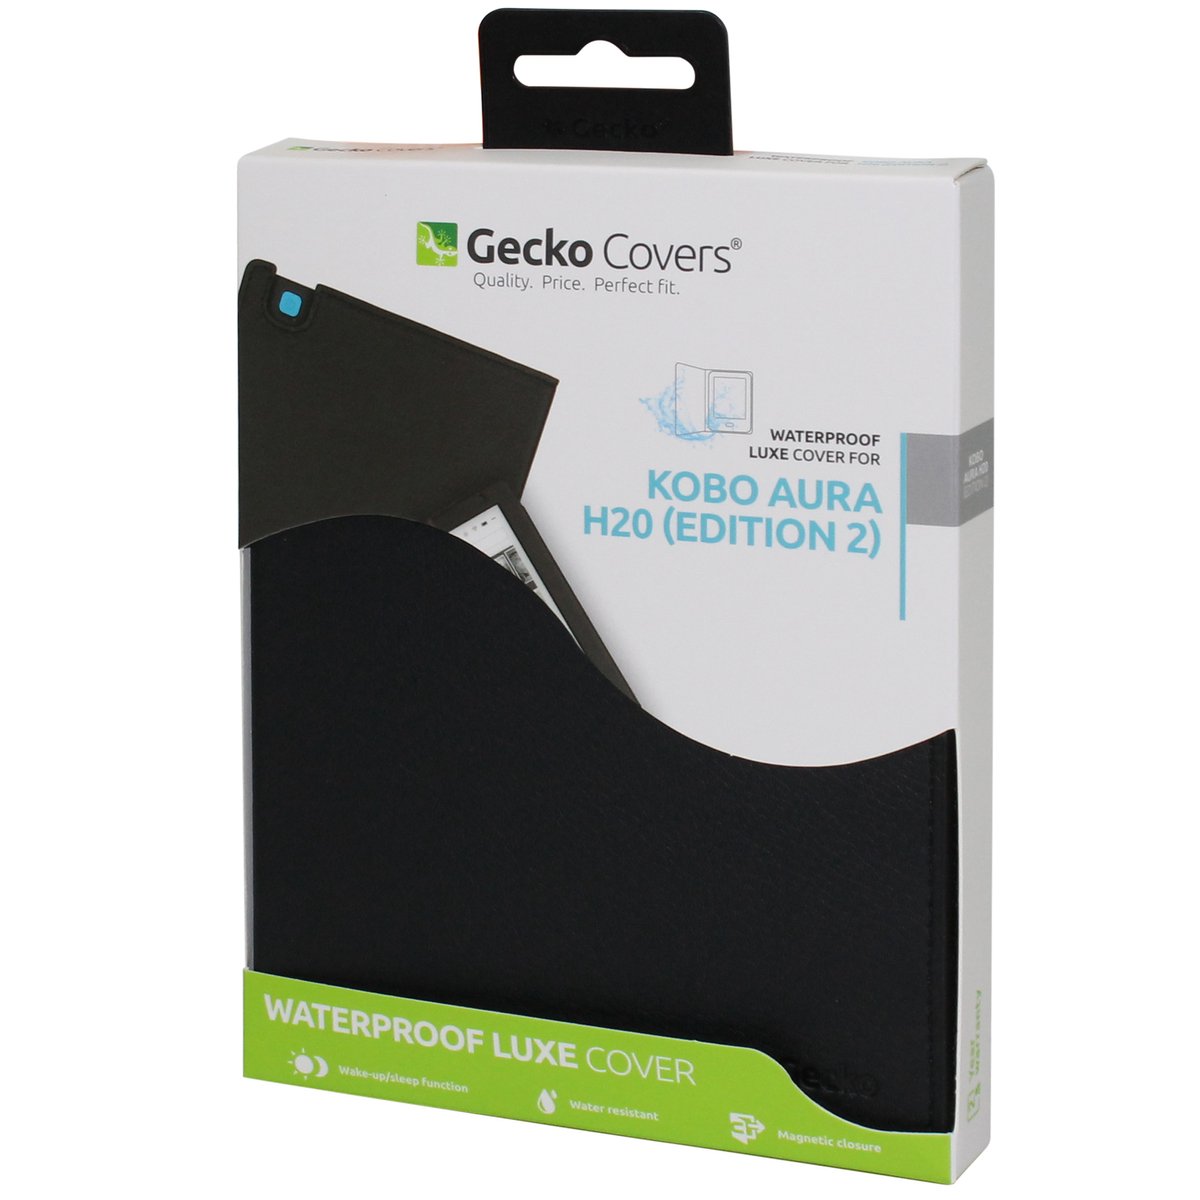 Gecko Covers Kobo Aura H2O (Edition 2) Luxe cover - Gecko Covers